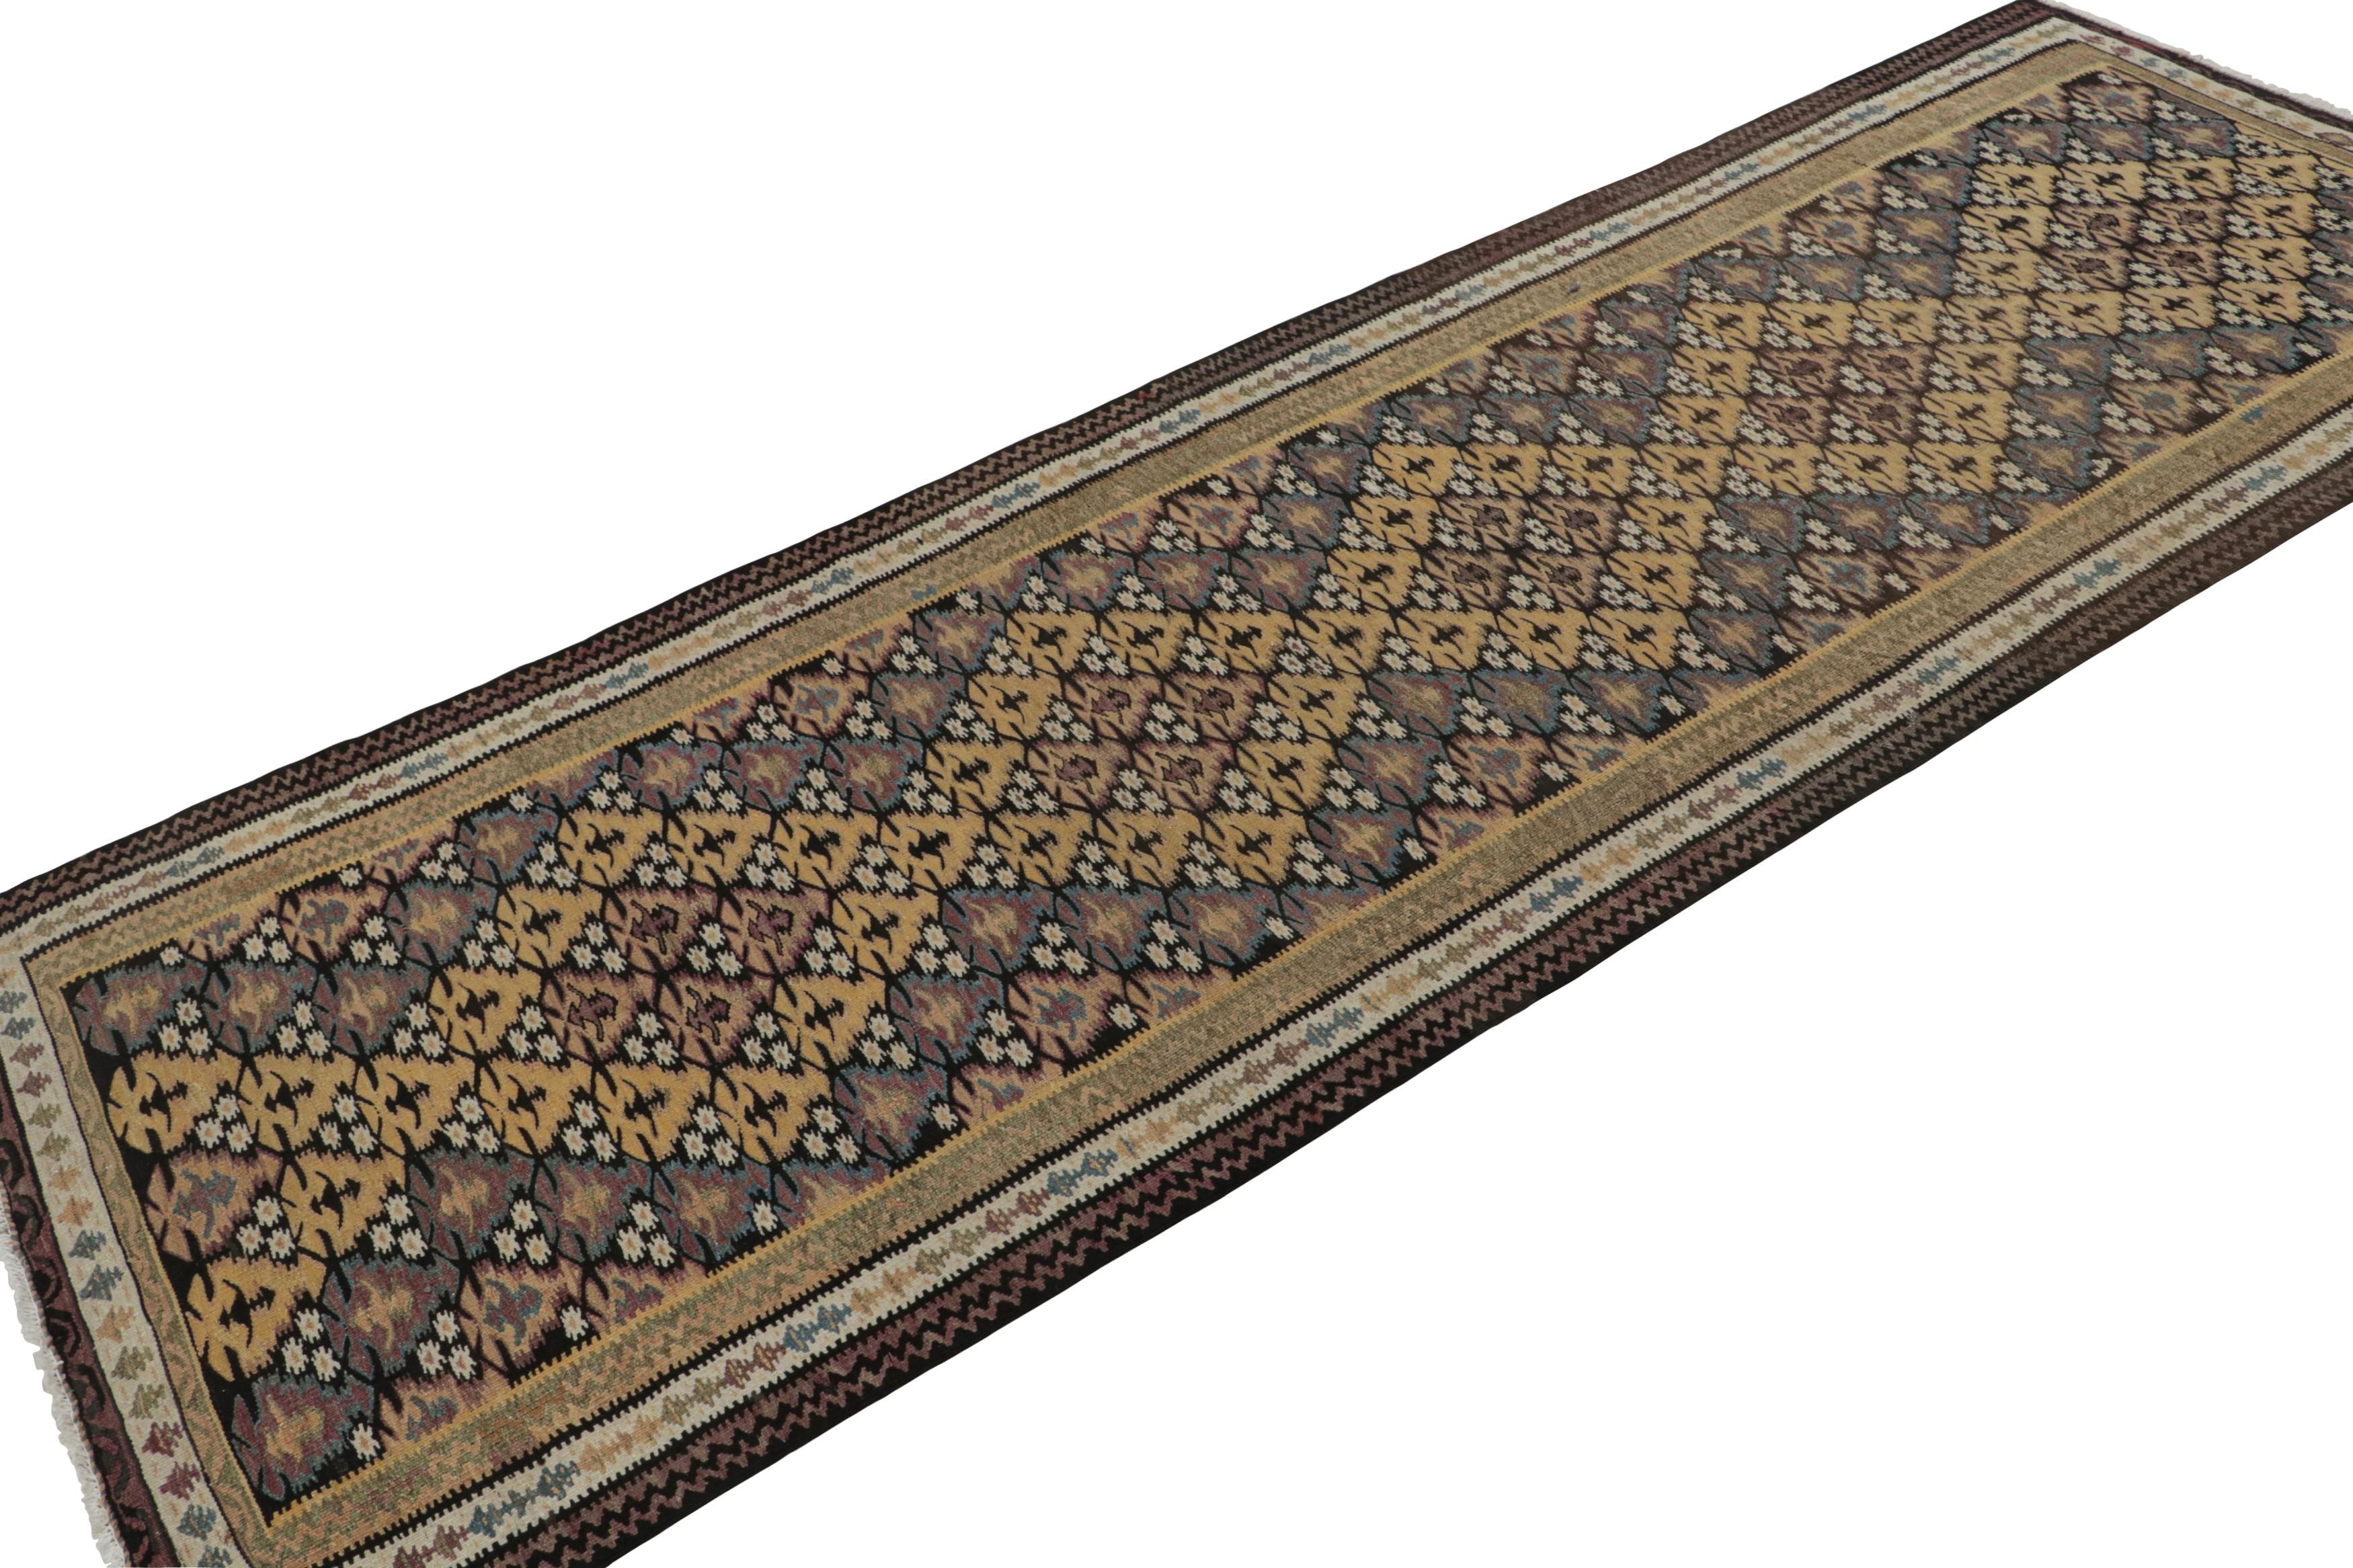 Hand-knotted in wool, this 3x10 vintage Persian tribal runner rug has mosaic-like geometric patterns in gold, beige/brown, blue and pink, all over the field. 

On the design: 

Connoisseurs will appreciate the vibrant blend of a playful color